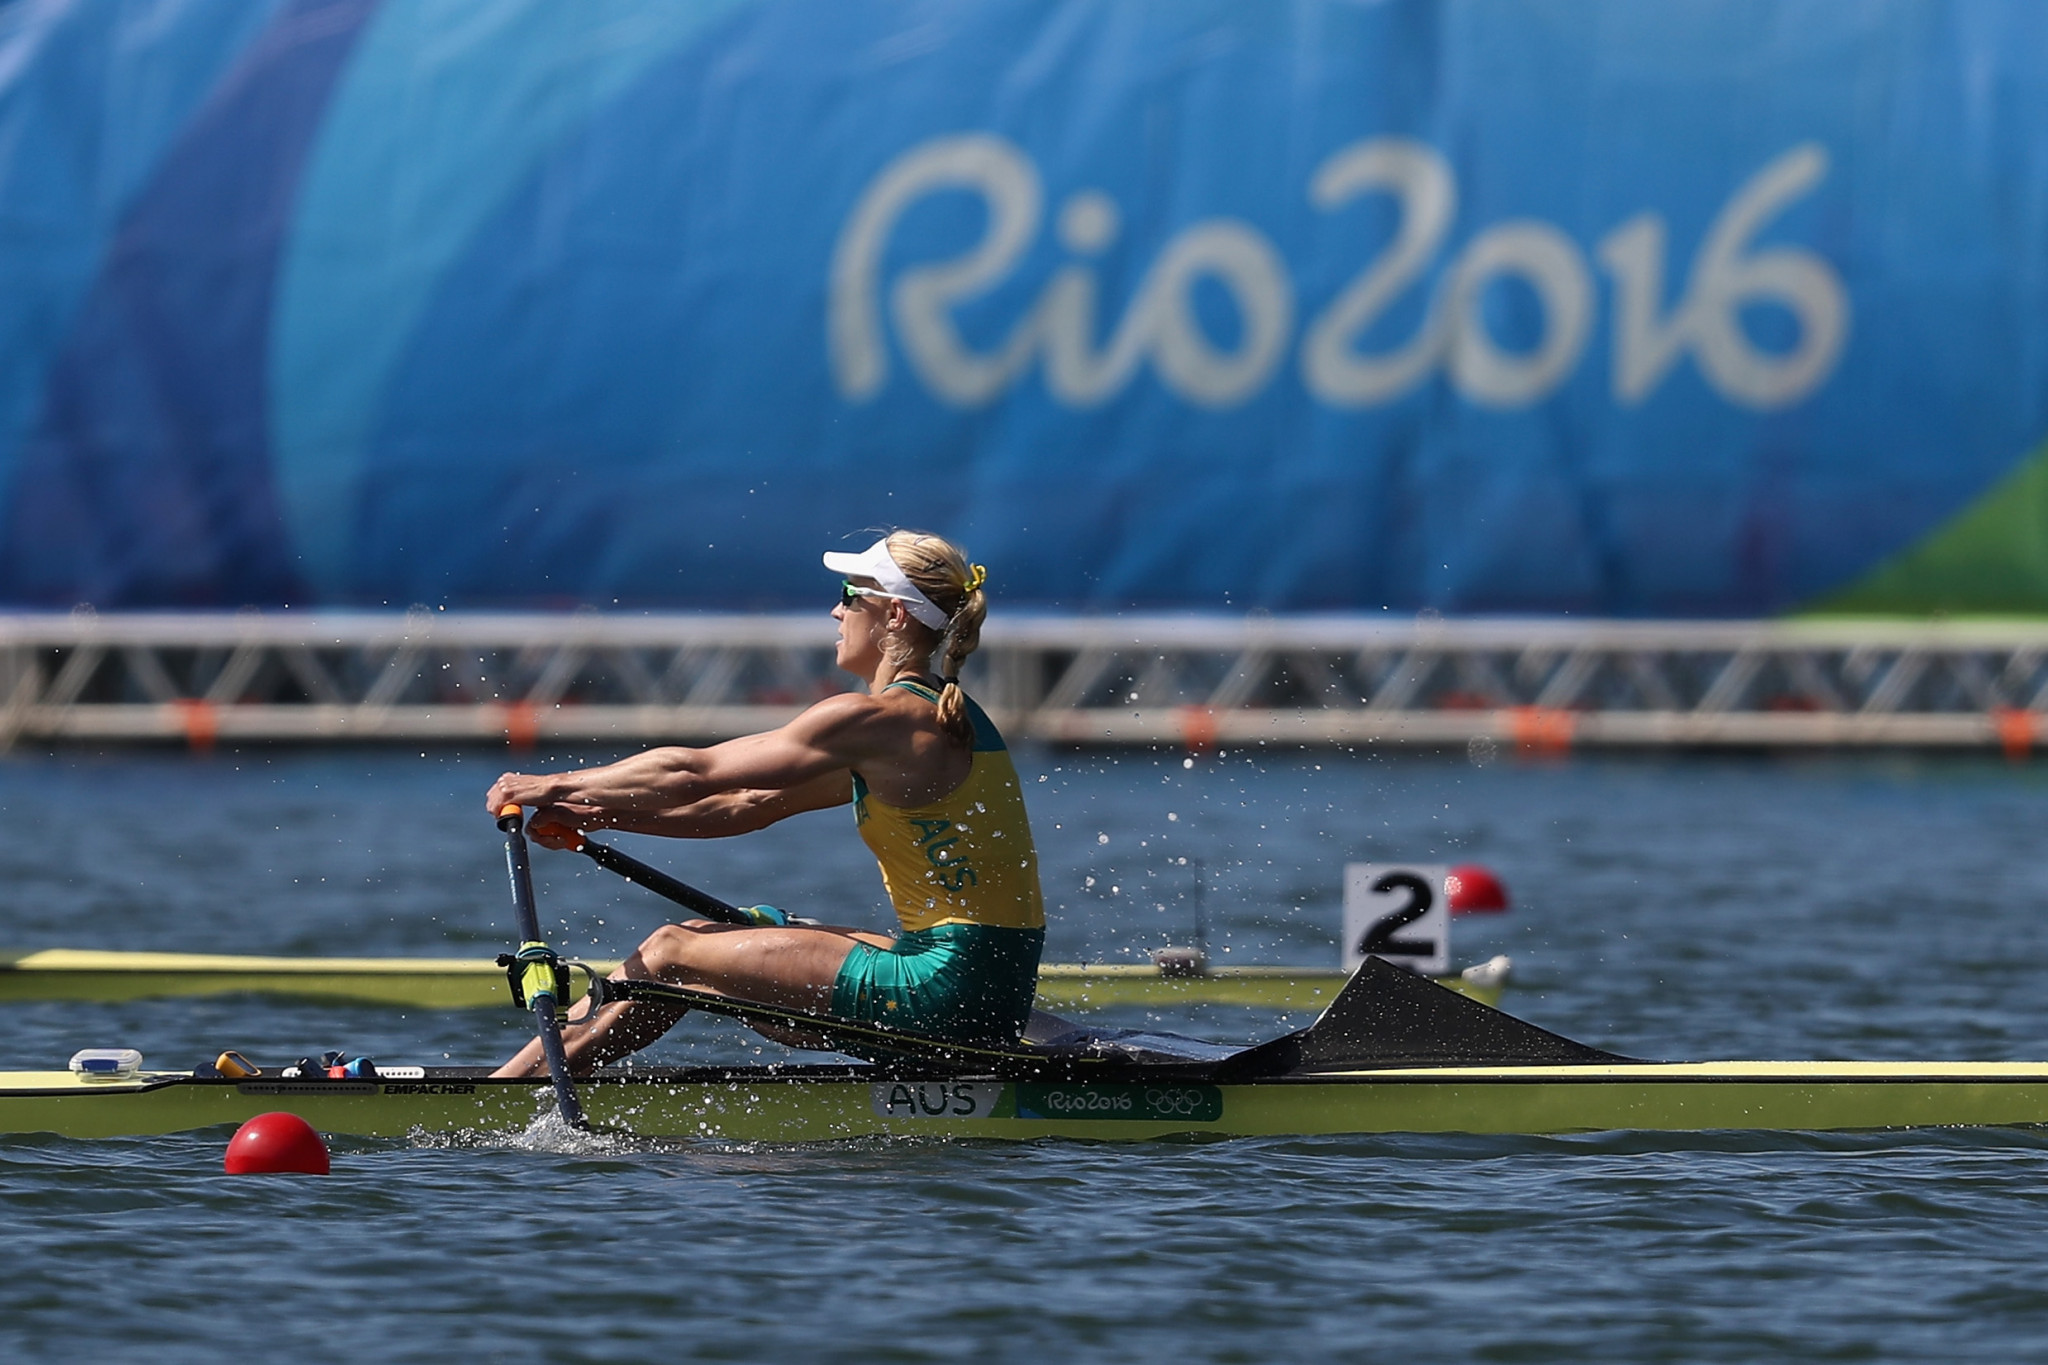 Rower Kim Brennan won an Olympic gold medal in the single sculls at Rio 2016 but at Tokyo 2020 will be one of Australia's Deputy Chef de Missions ©Getty Images